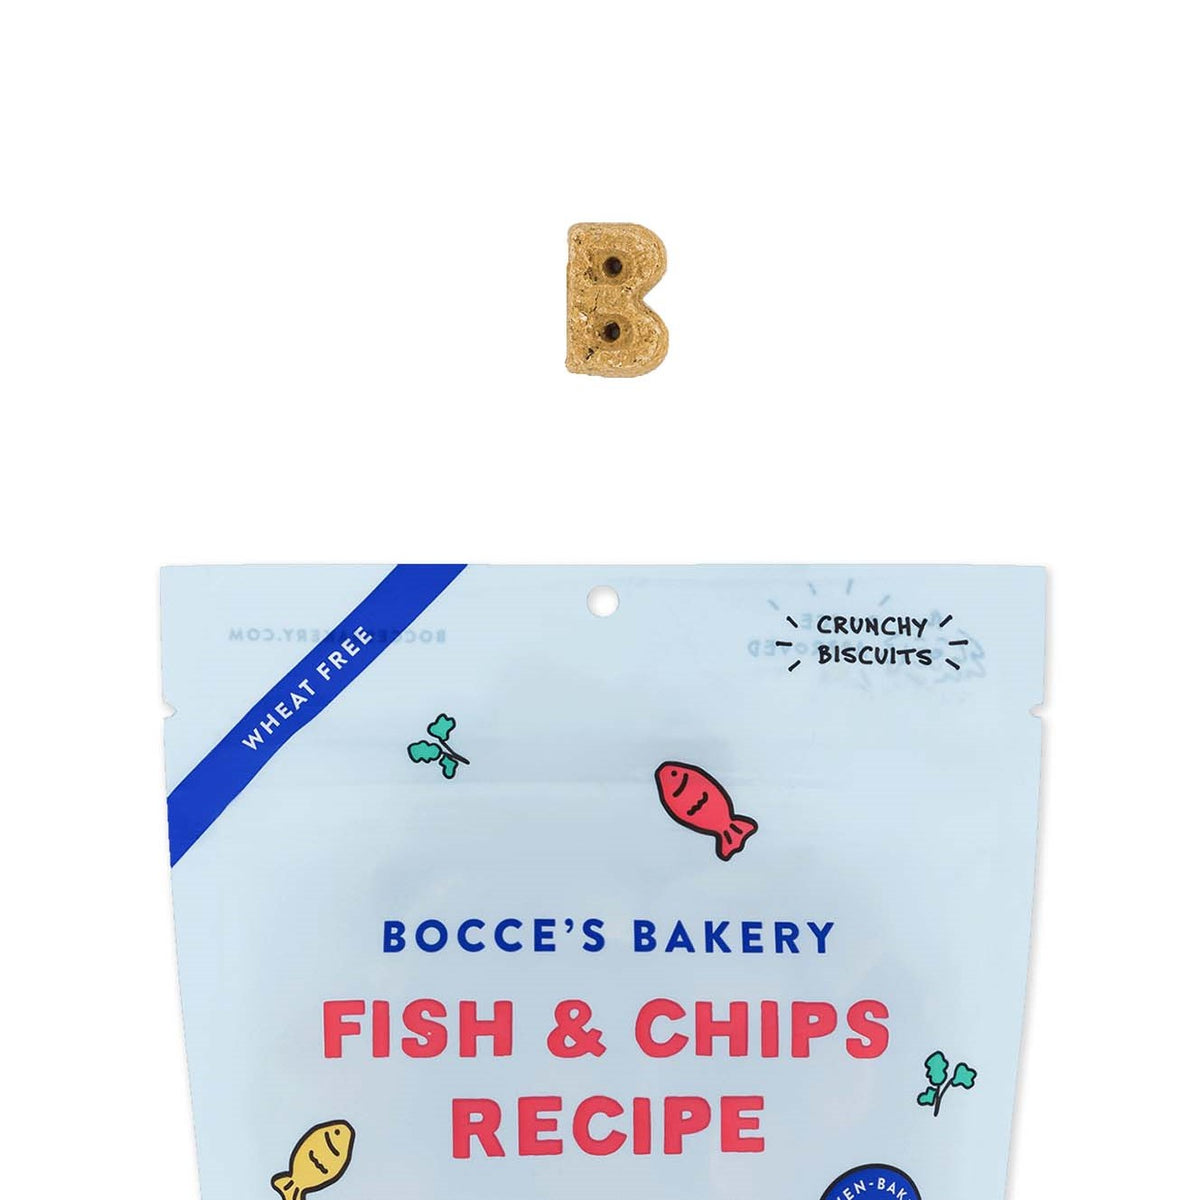 Boccee's Fish & Chips Biscuits 5oz (142g)